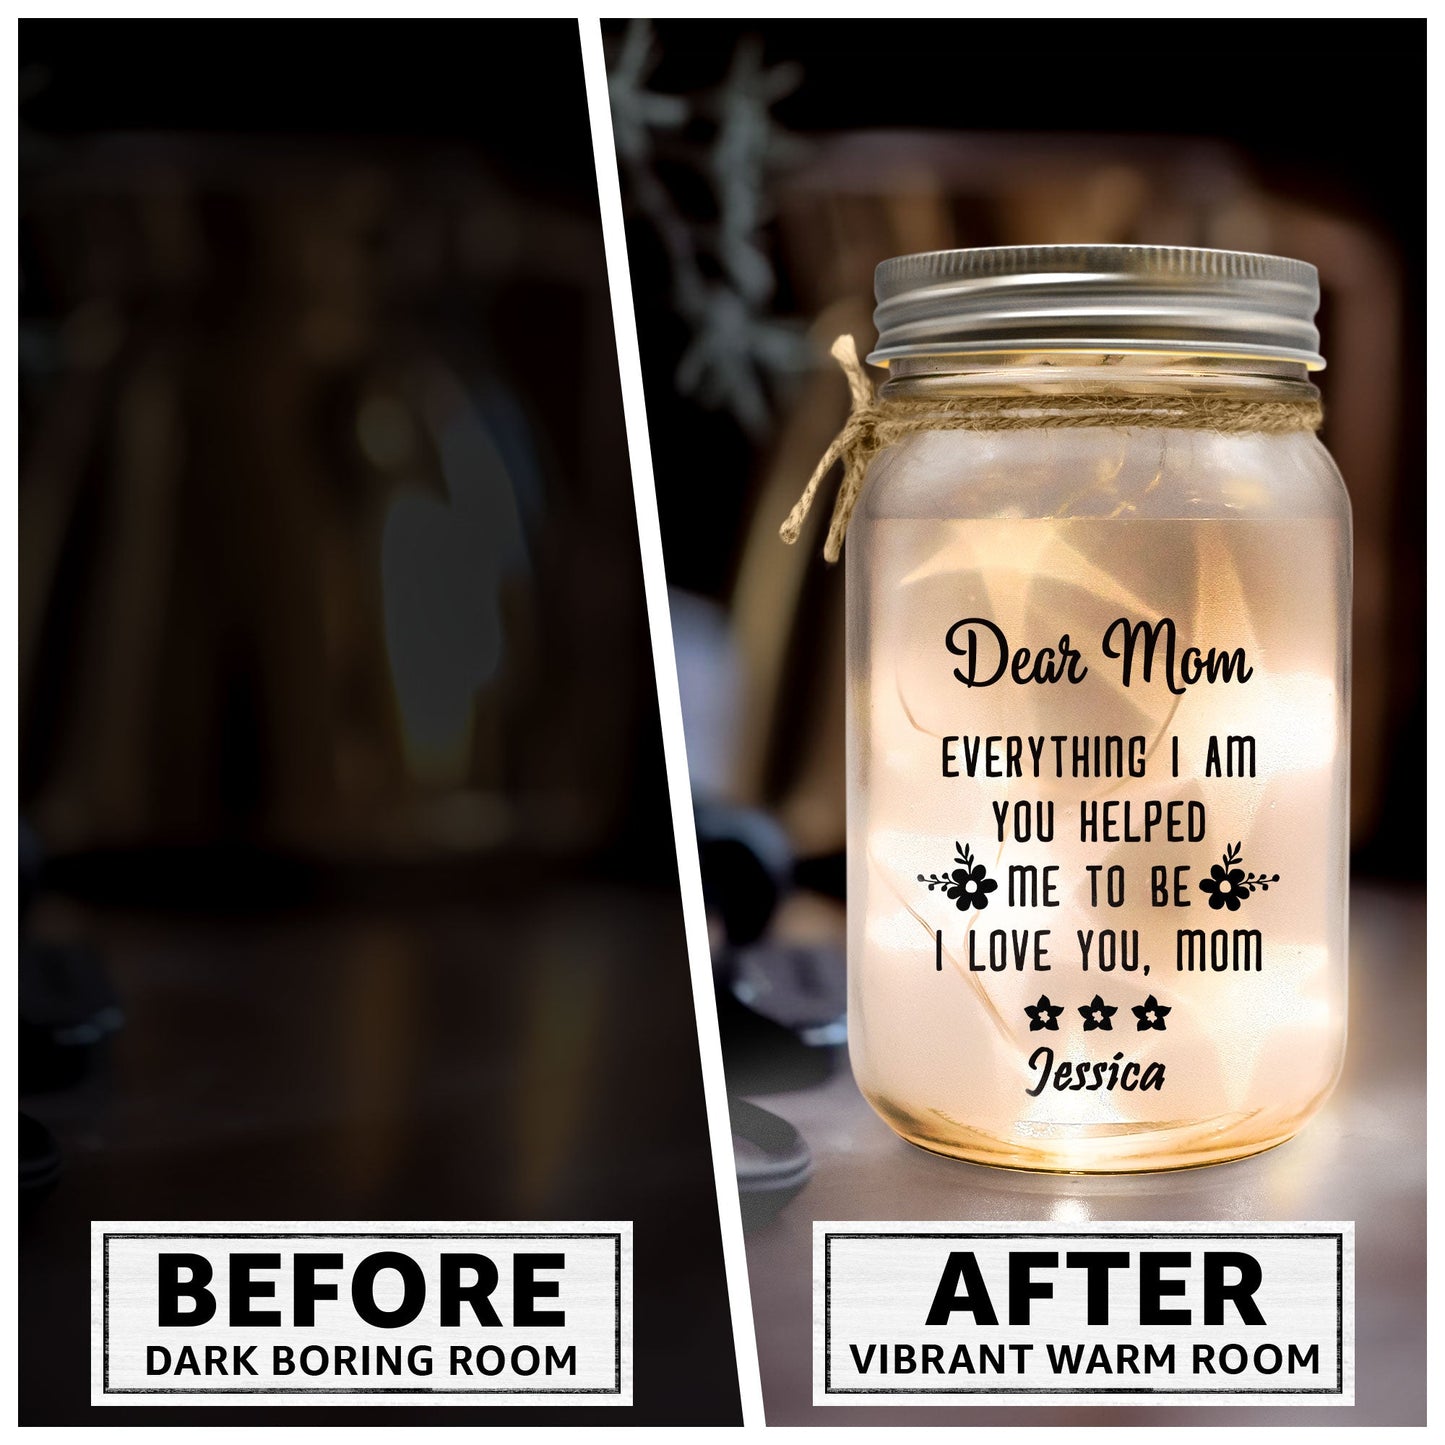 Everything I Am You Helped Me To Be - Personalized Mason Jar Light